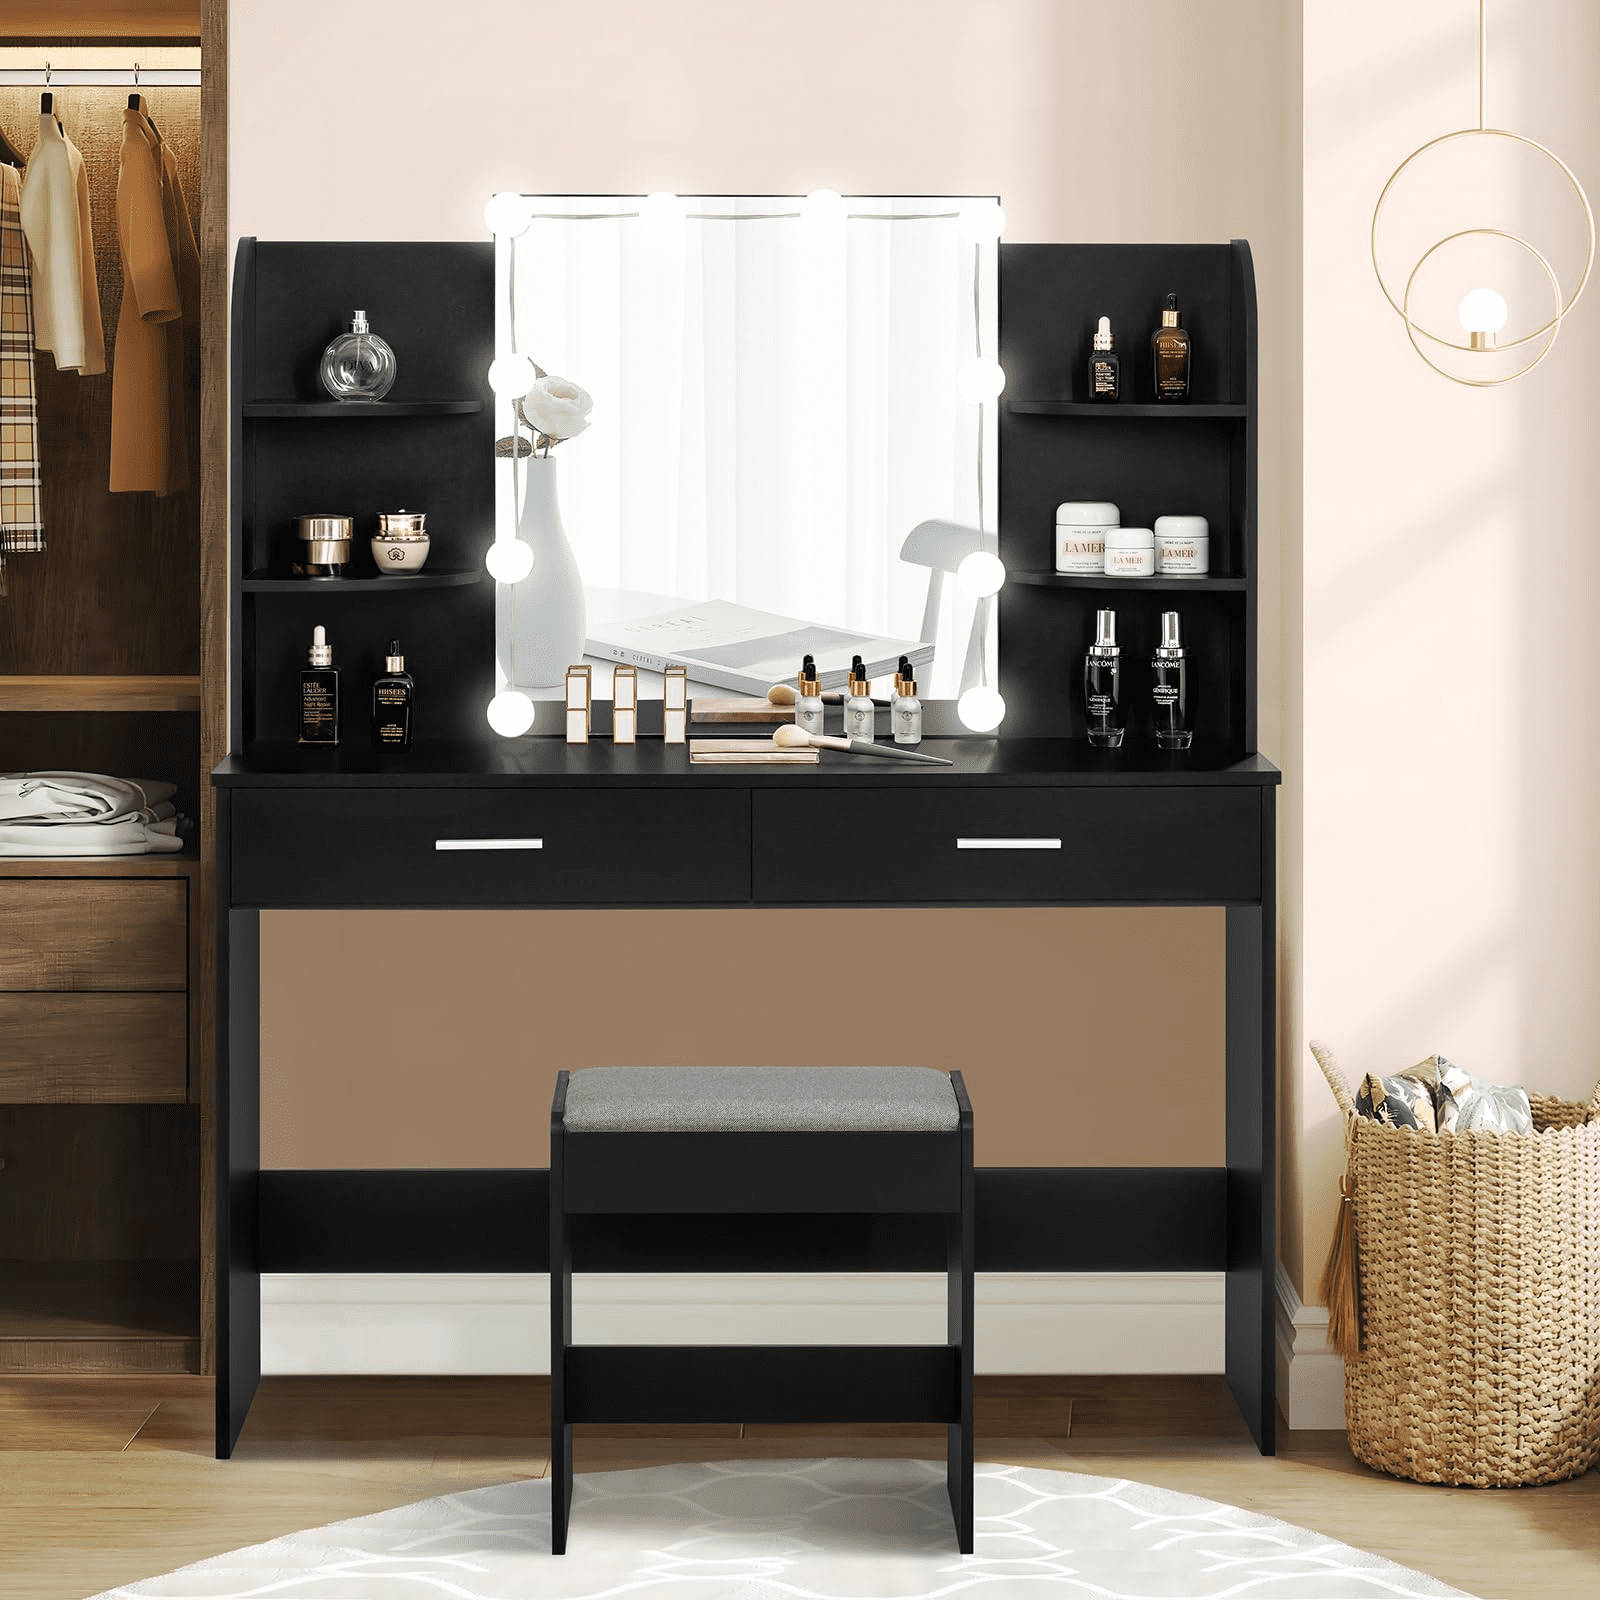 USIKEY Large Vanity Set with 10 Light Bulbs & Cushioned Stool, Makeup Table with 2 Drawers, Table Dresser Desk for Bedroom, Black - Walmart.com